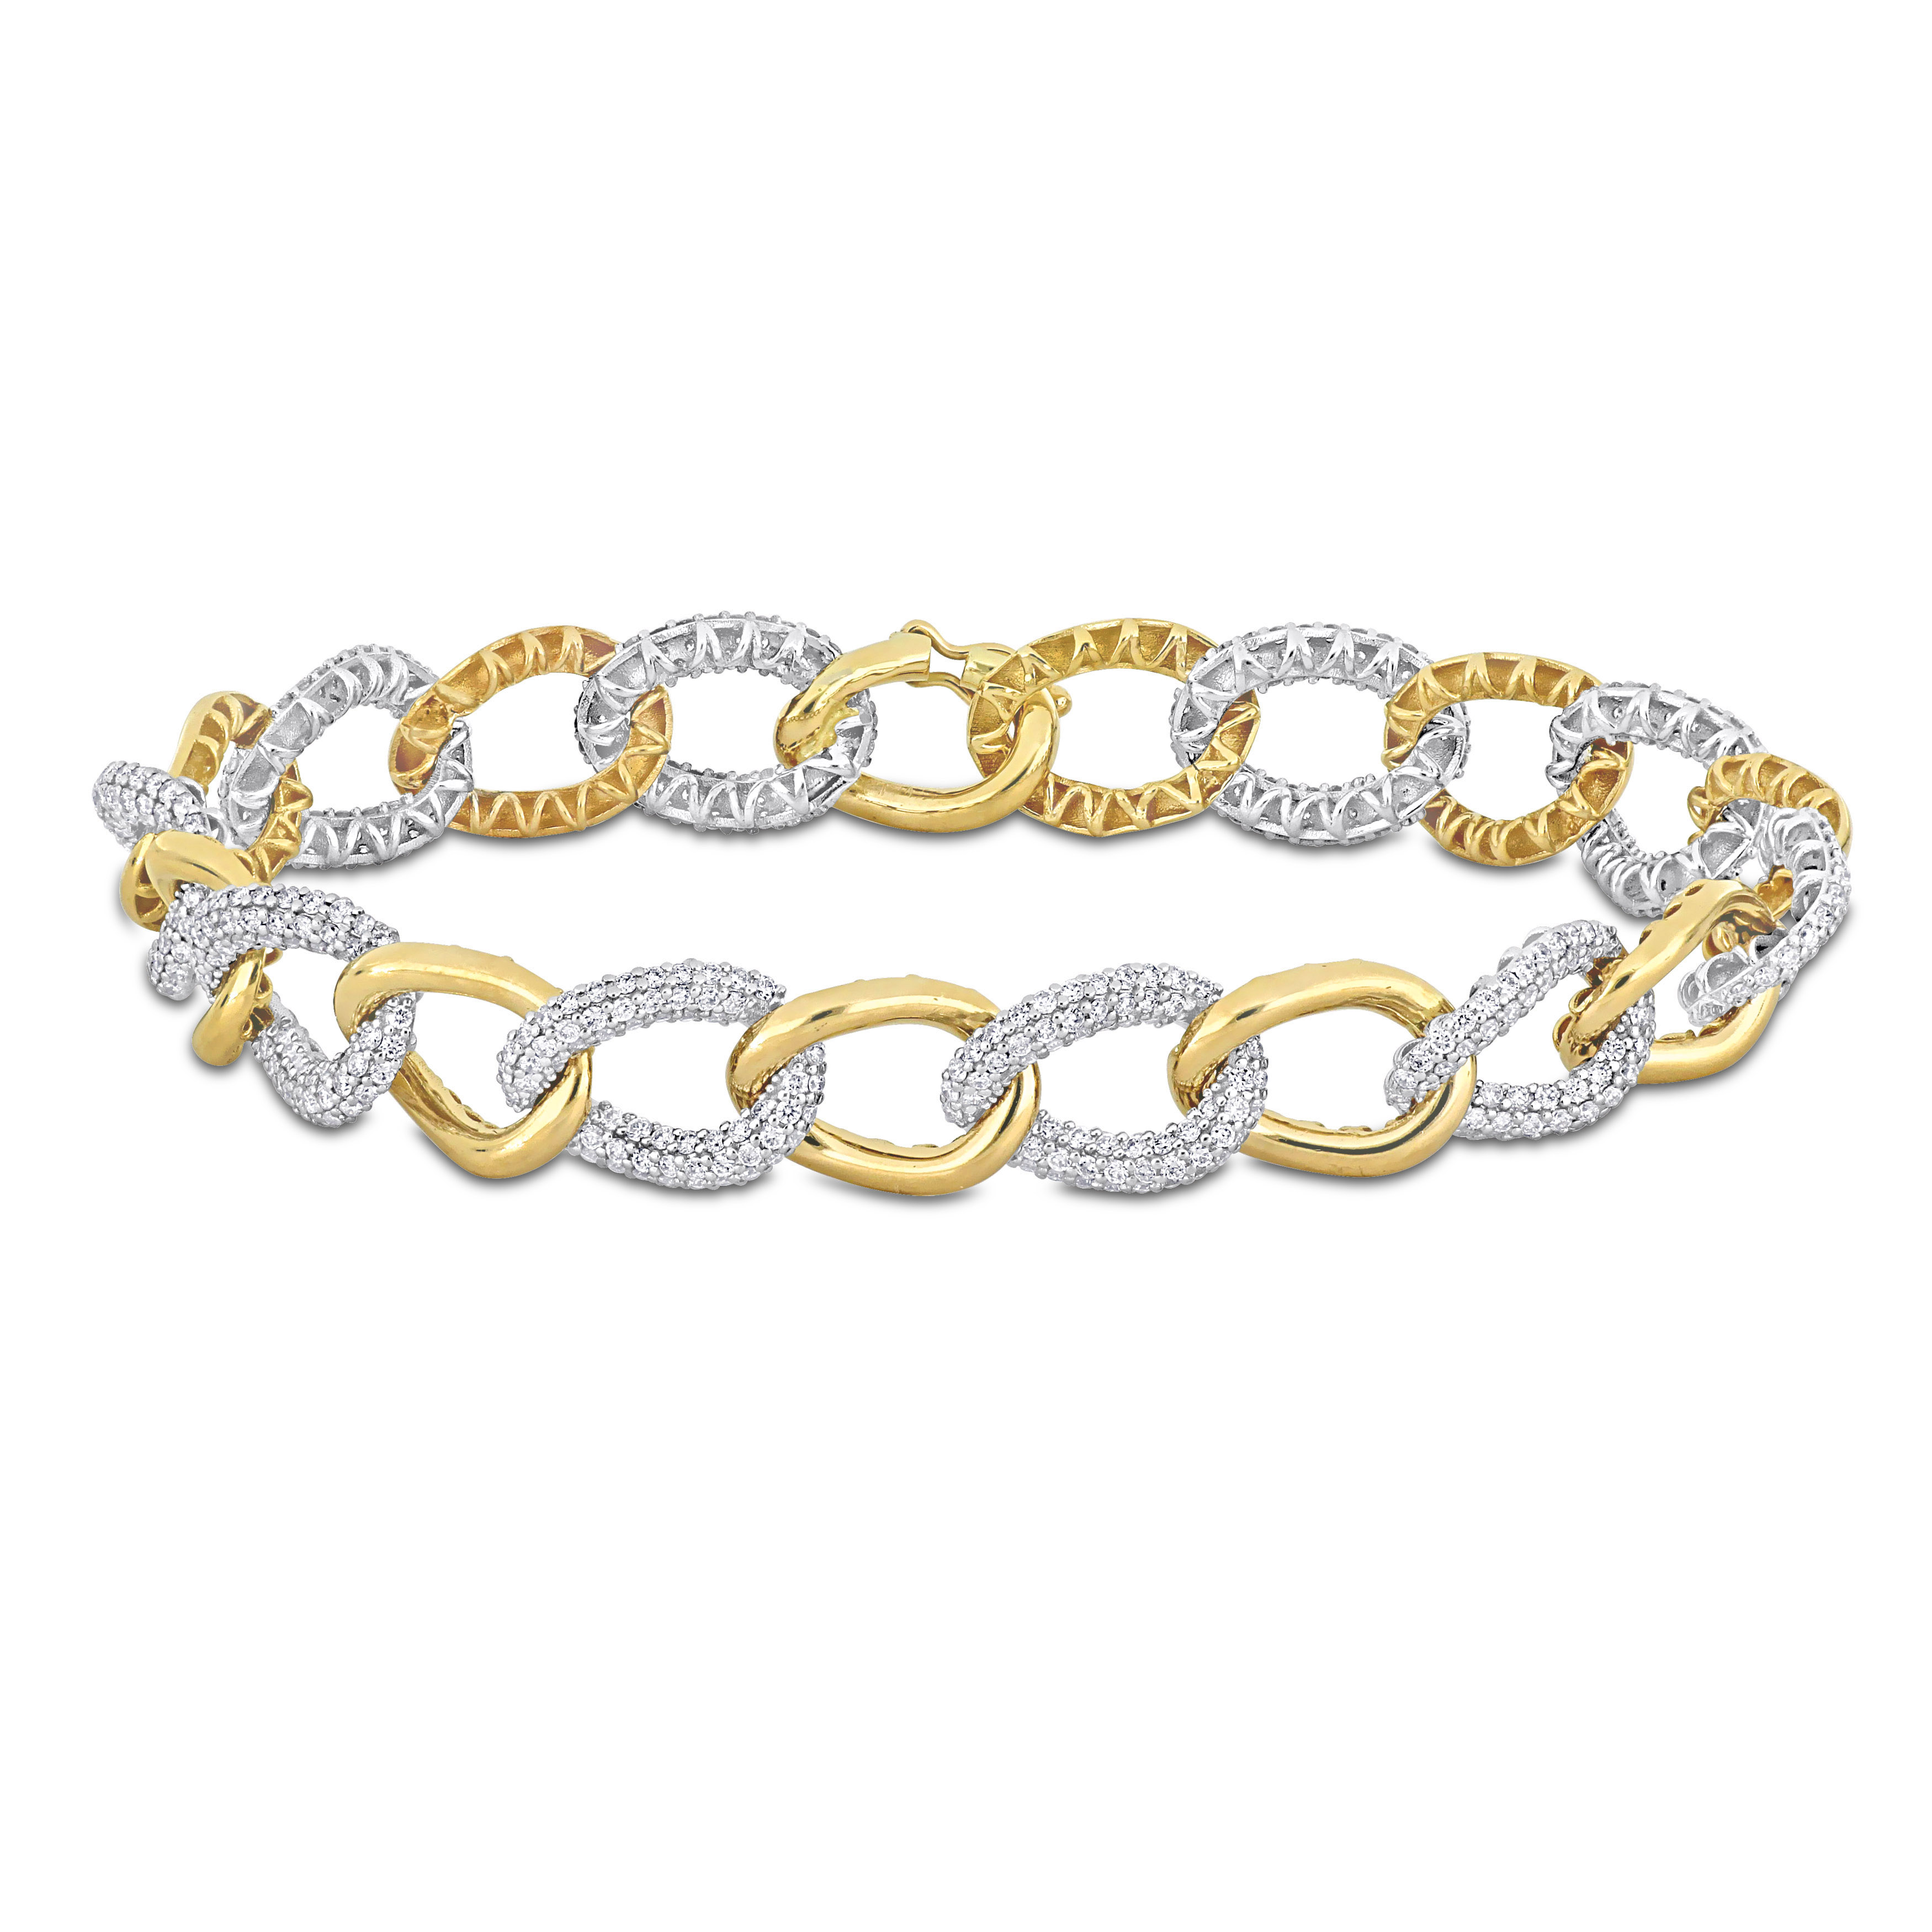 2 3/8 CT TDW Diamond Link Bracelet in Two-Tone 14K White And Yellow Gold - 7.5 In.